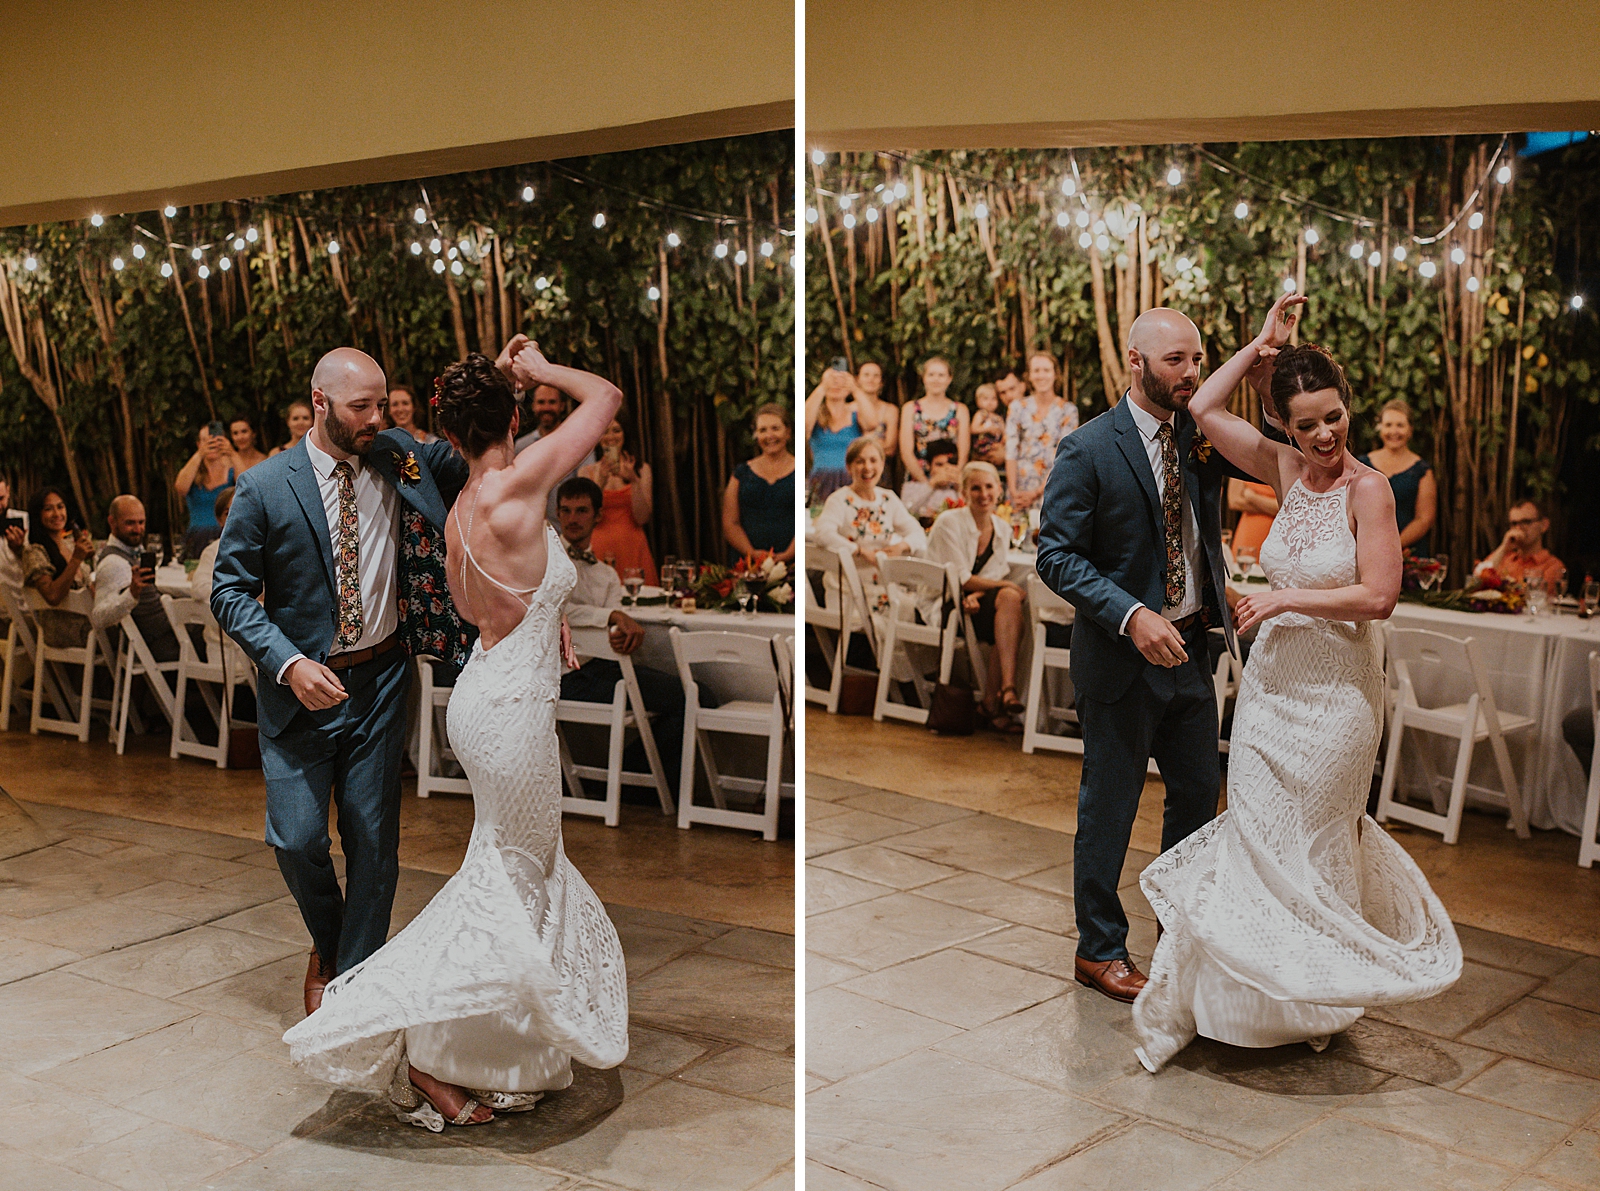 Bride twirling by Groom's hand for outdoor Reception